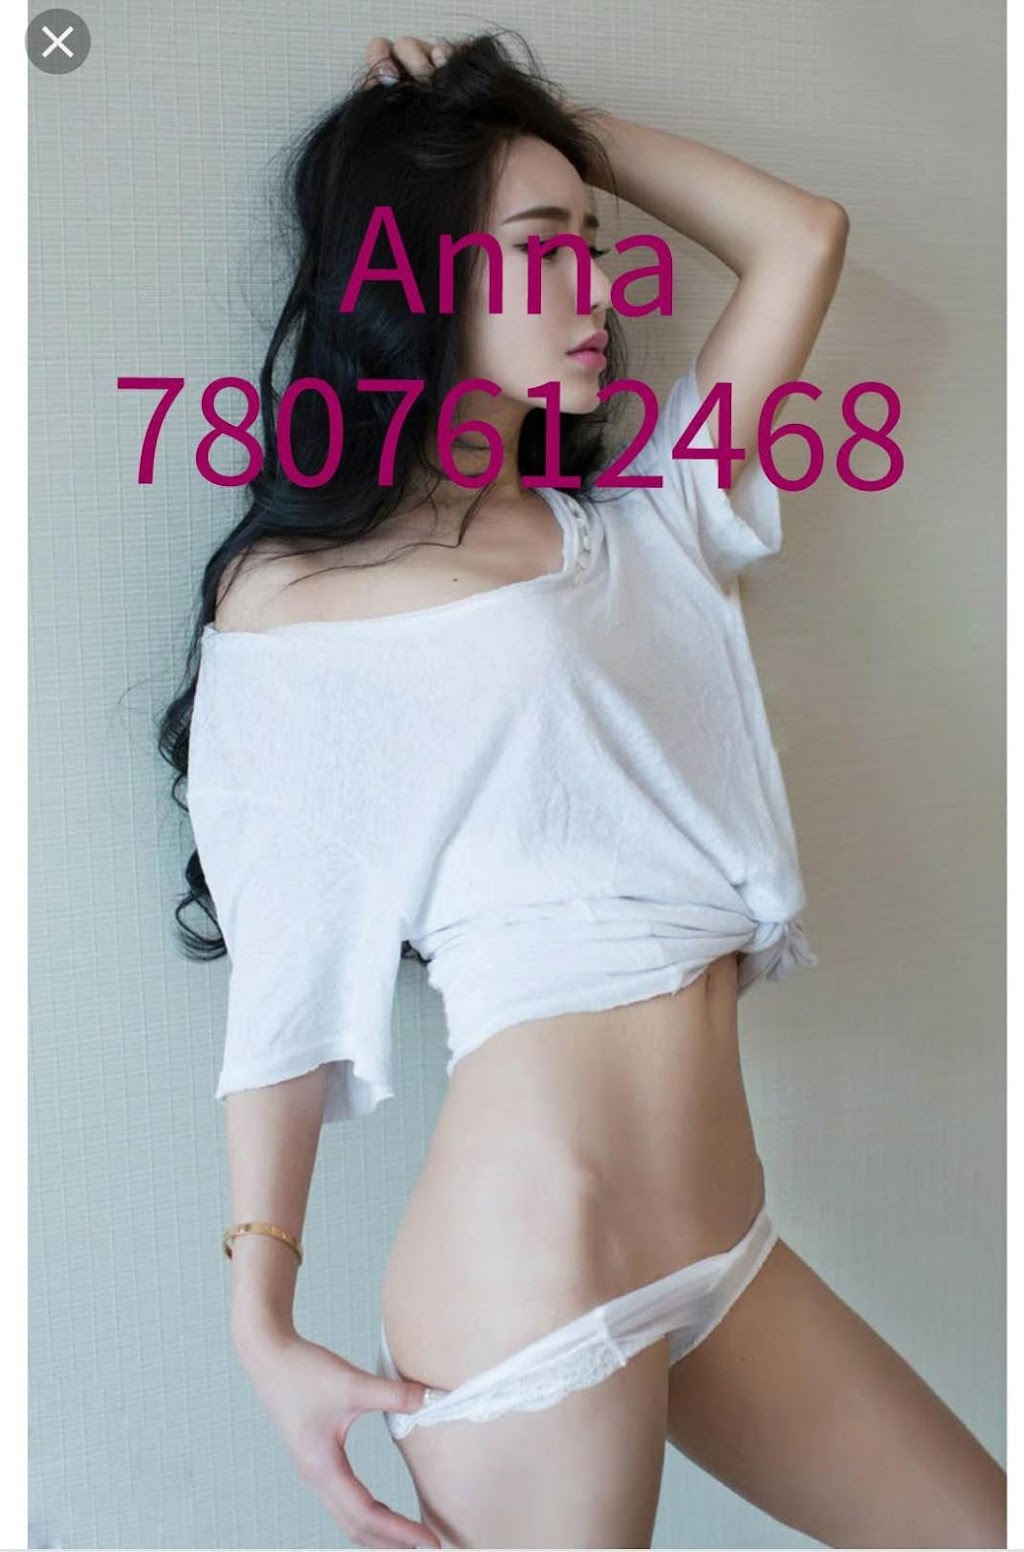 Beyond Paradise Massage | spa | 6510 118 Ave NW, Edmonton, AB T5W 1G6, Canada | 7807612468 OR +1 780-761-2468